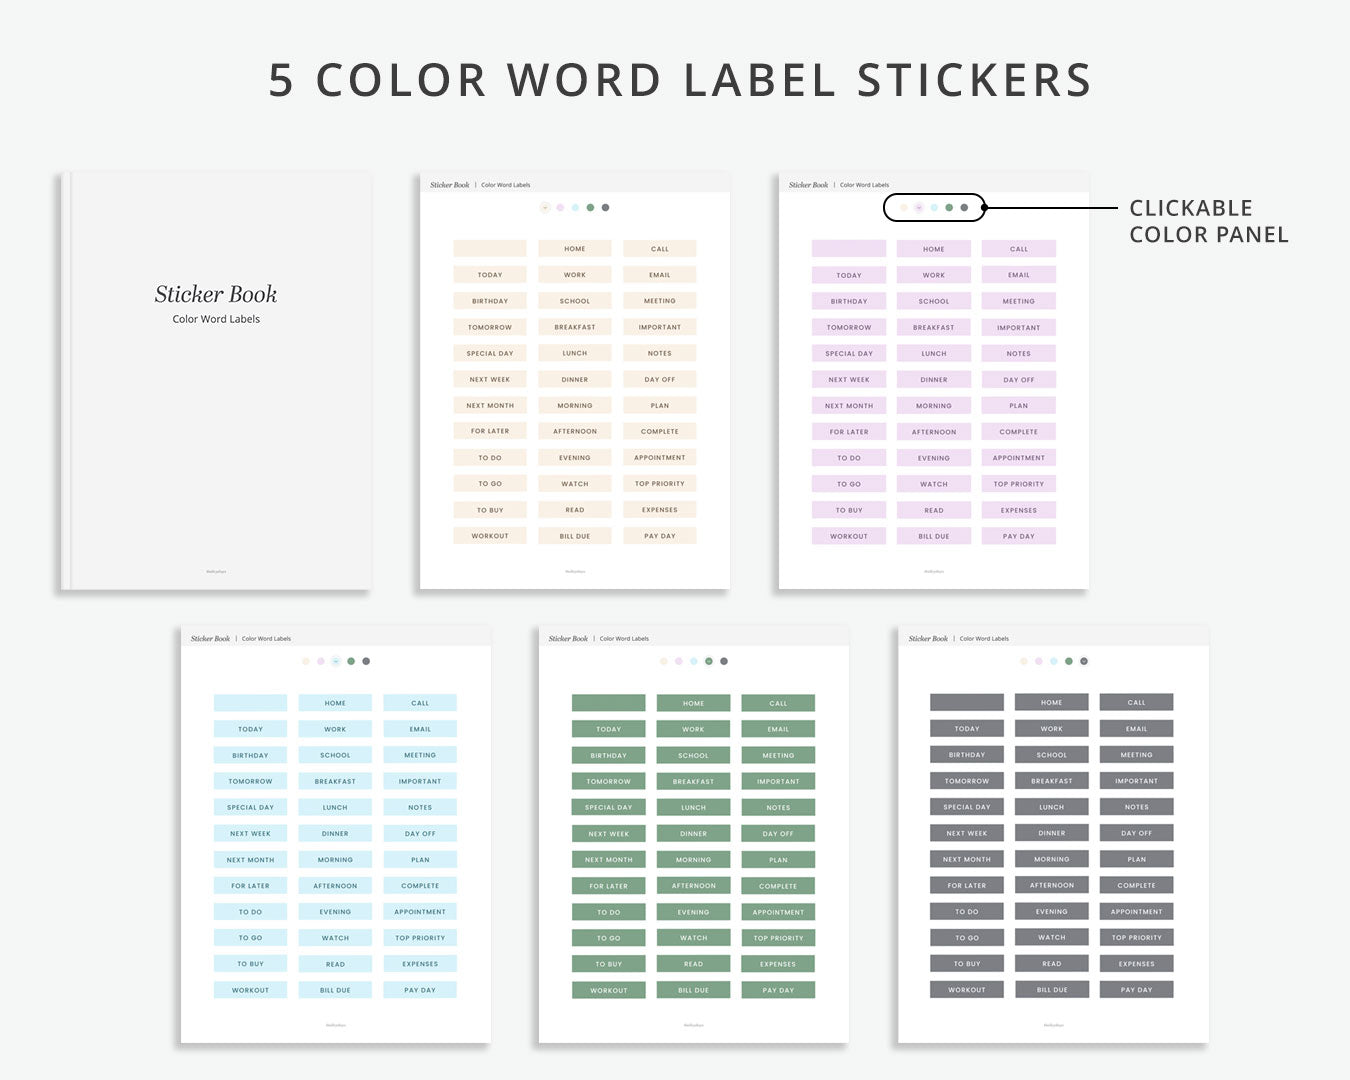 Word Label Stickers